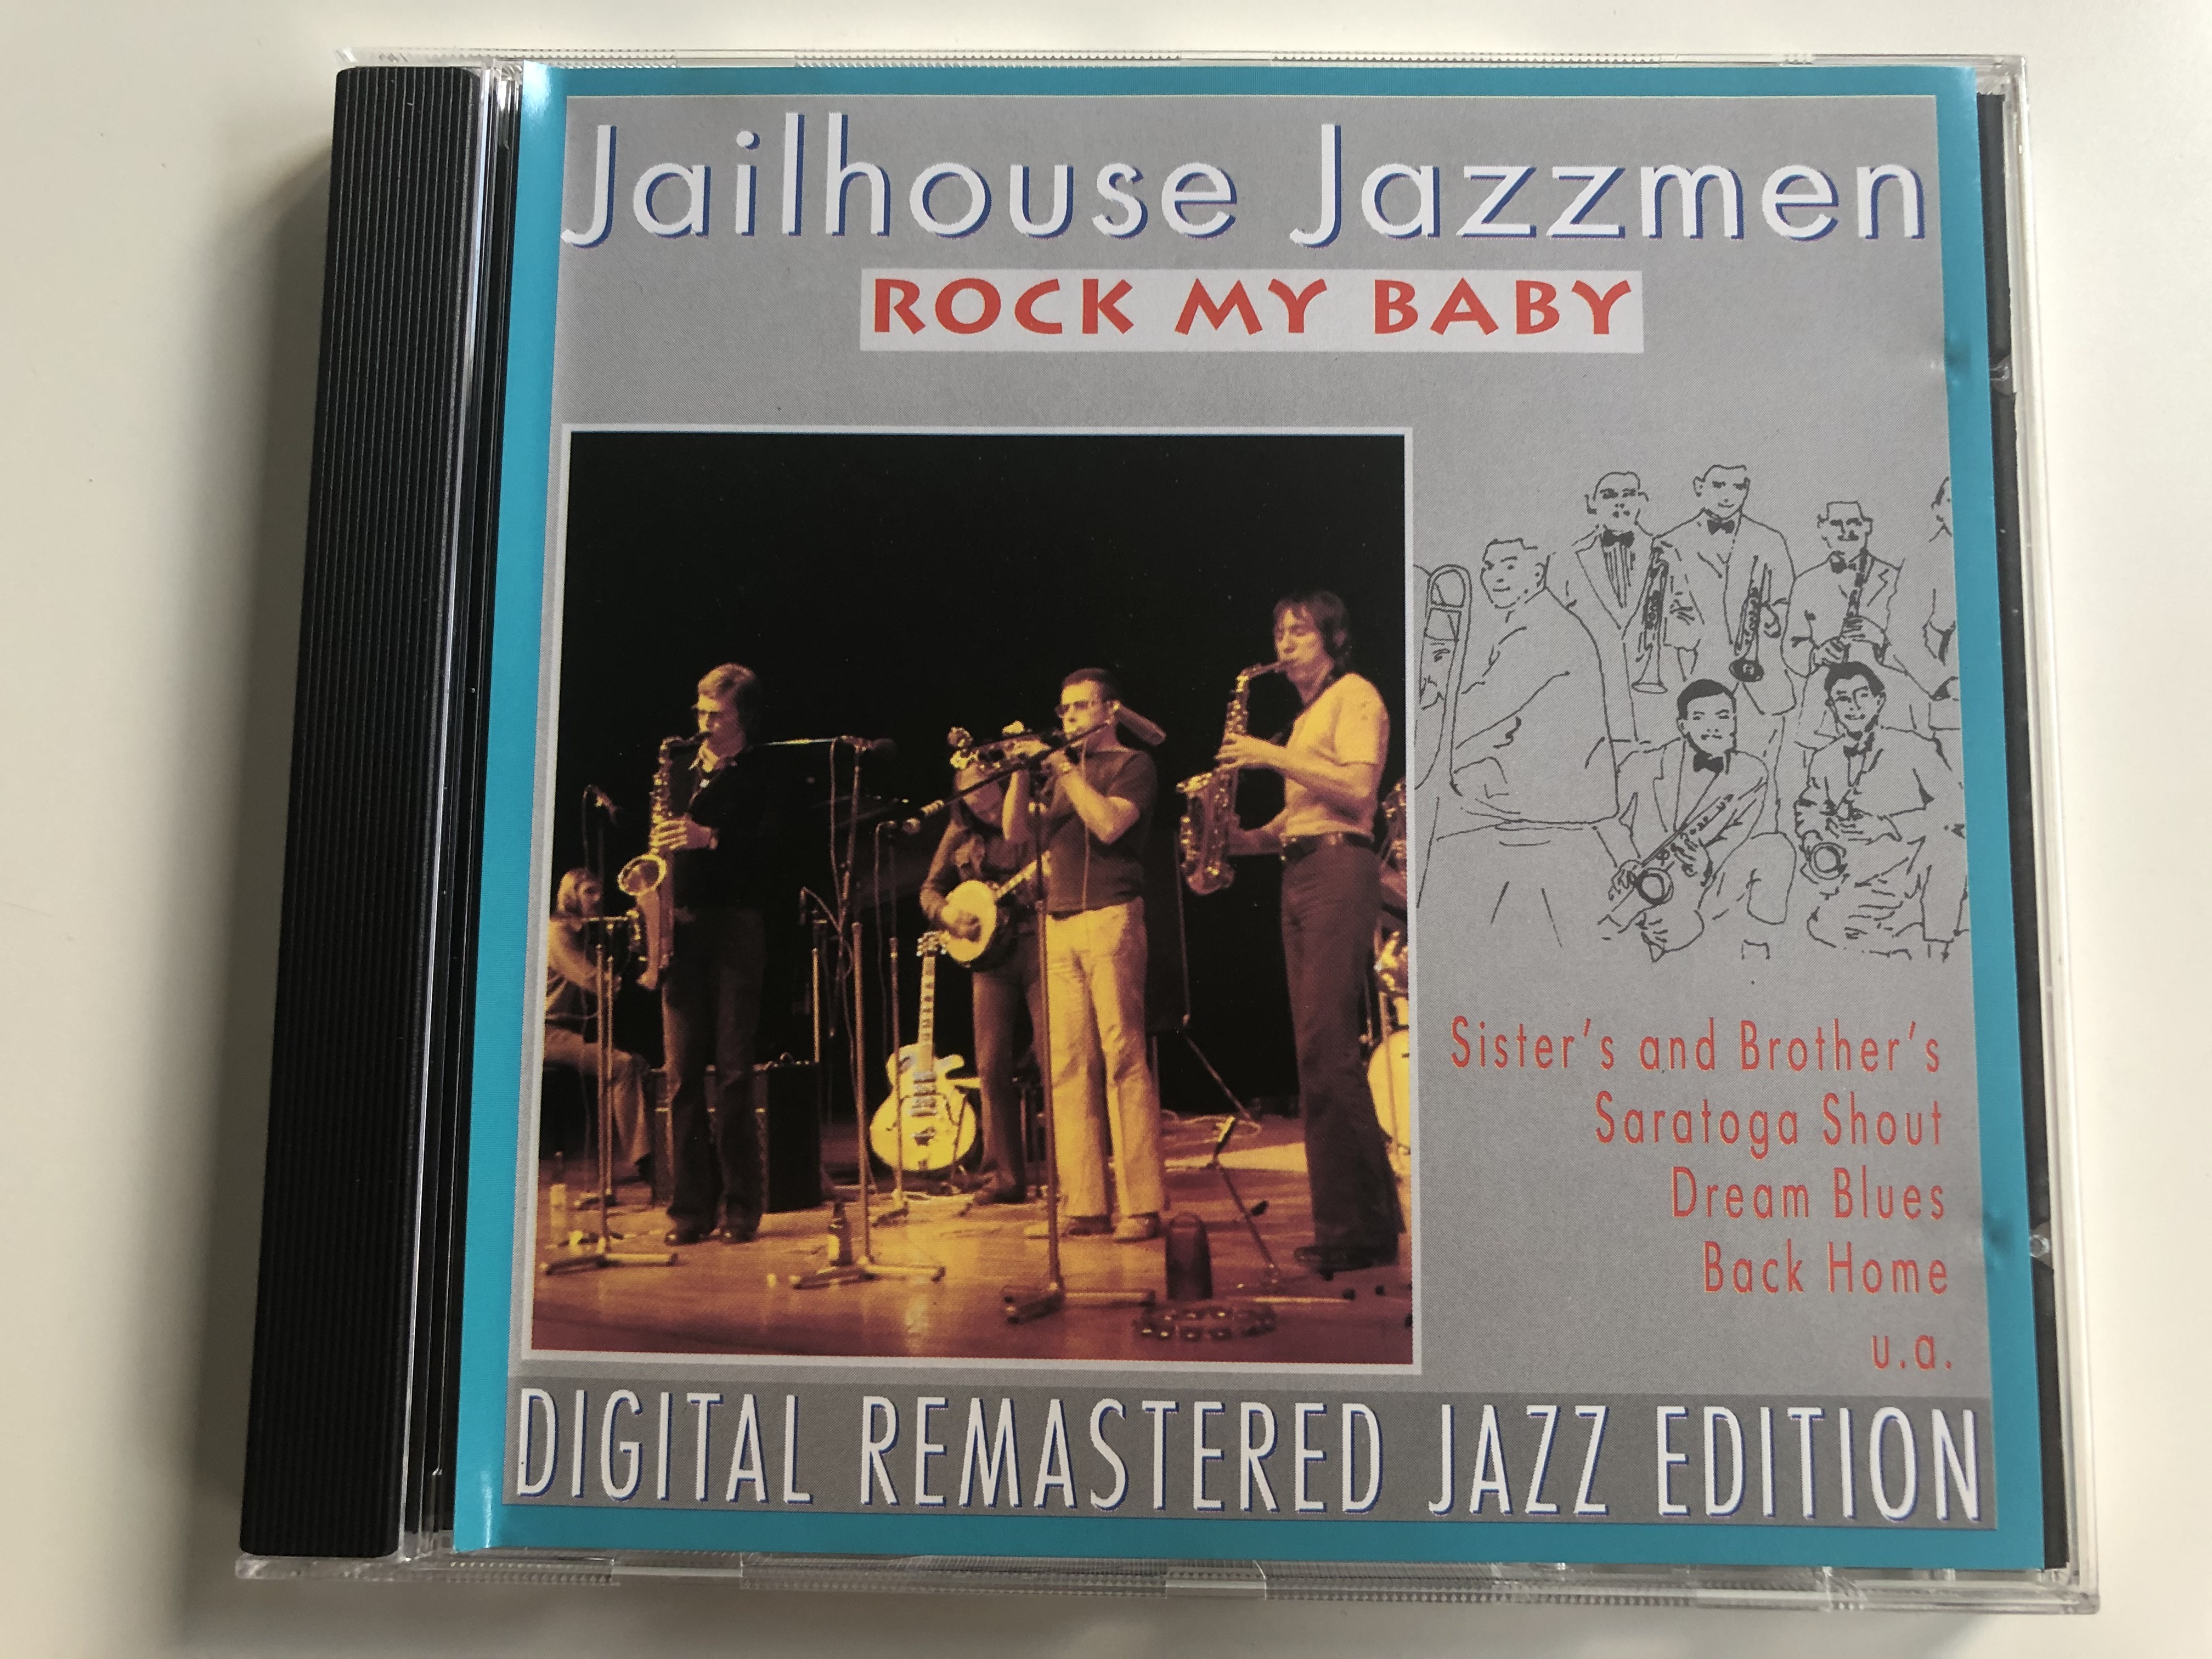 jailhouse-jazzmen-rock-my-baby-sister-s-and-brother-s-saratoga-shout-dream-blues-back-home-u.a.-digital-remastered-jazz-edition-pastels-audio-cd-1995-cd-20-1-.jpg